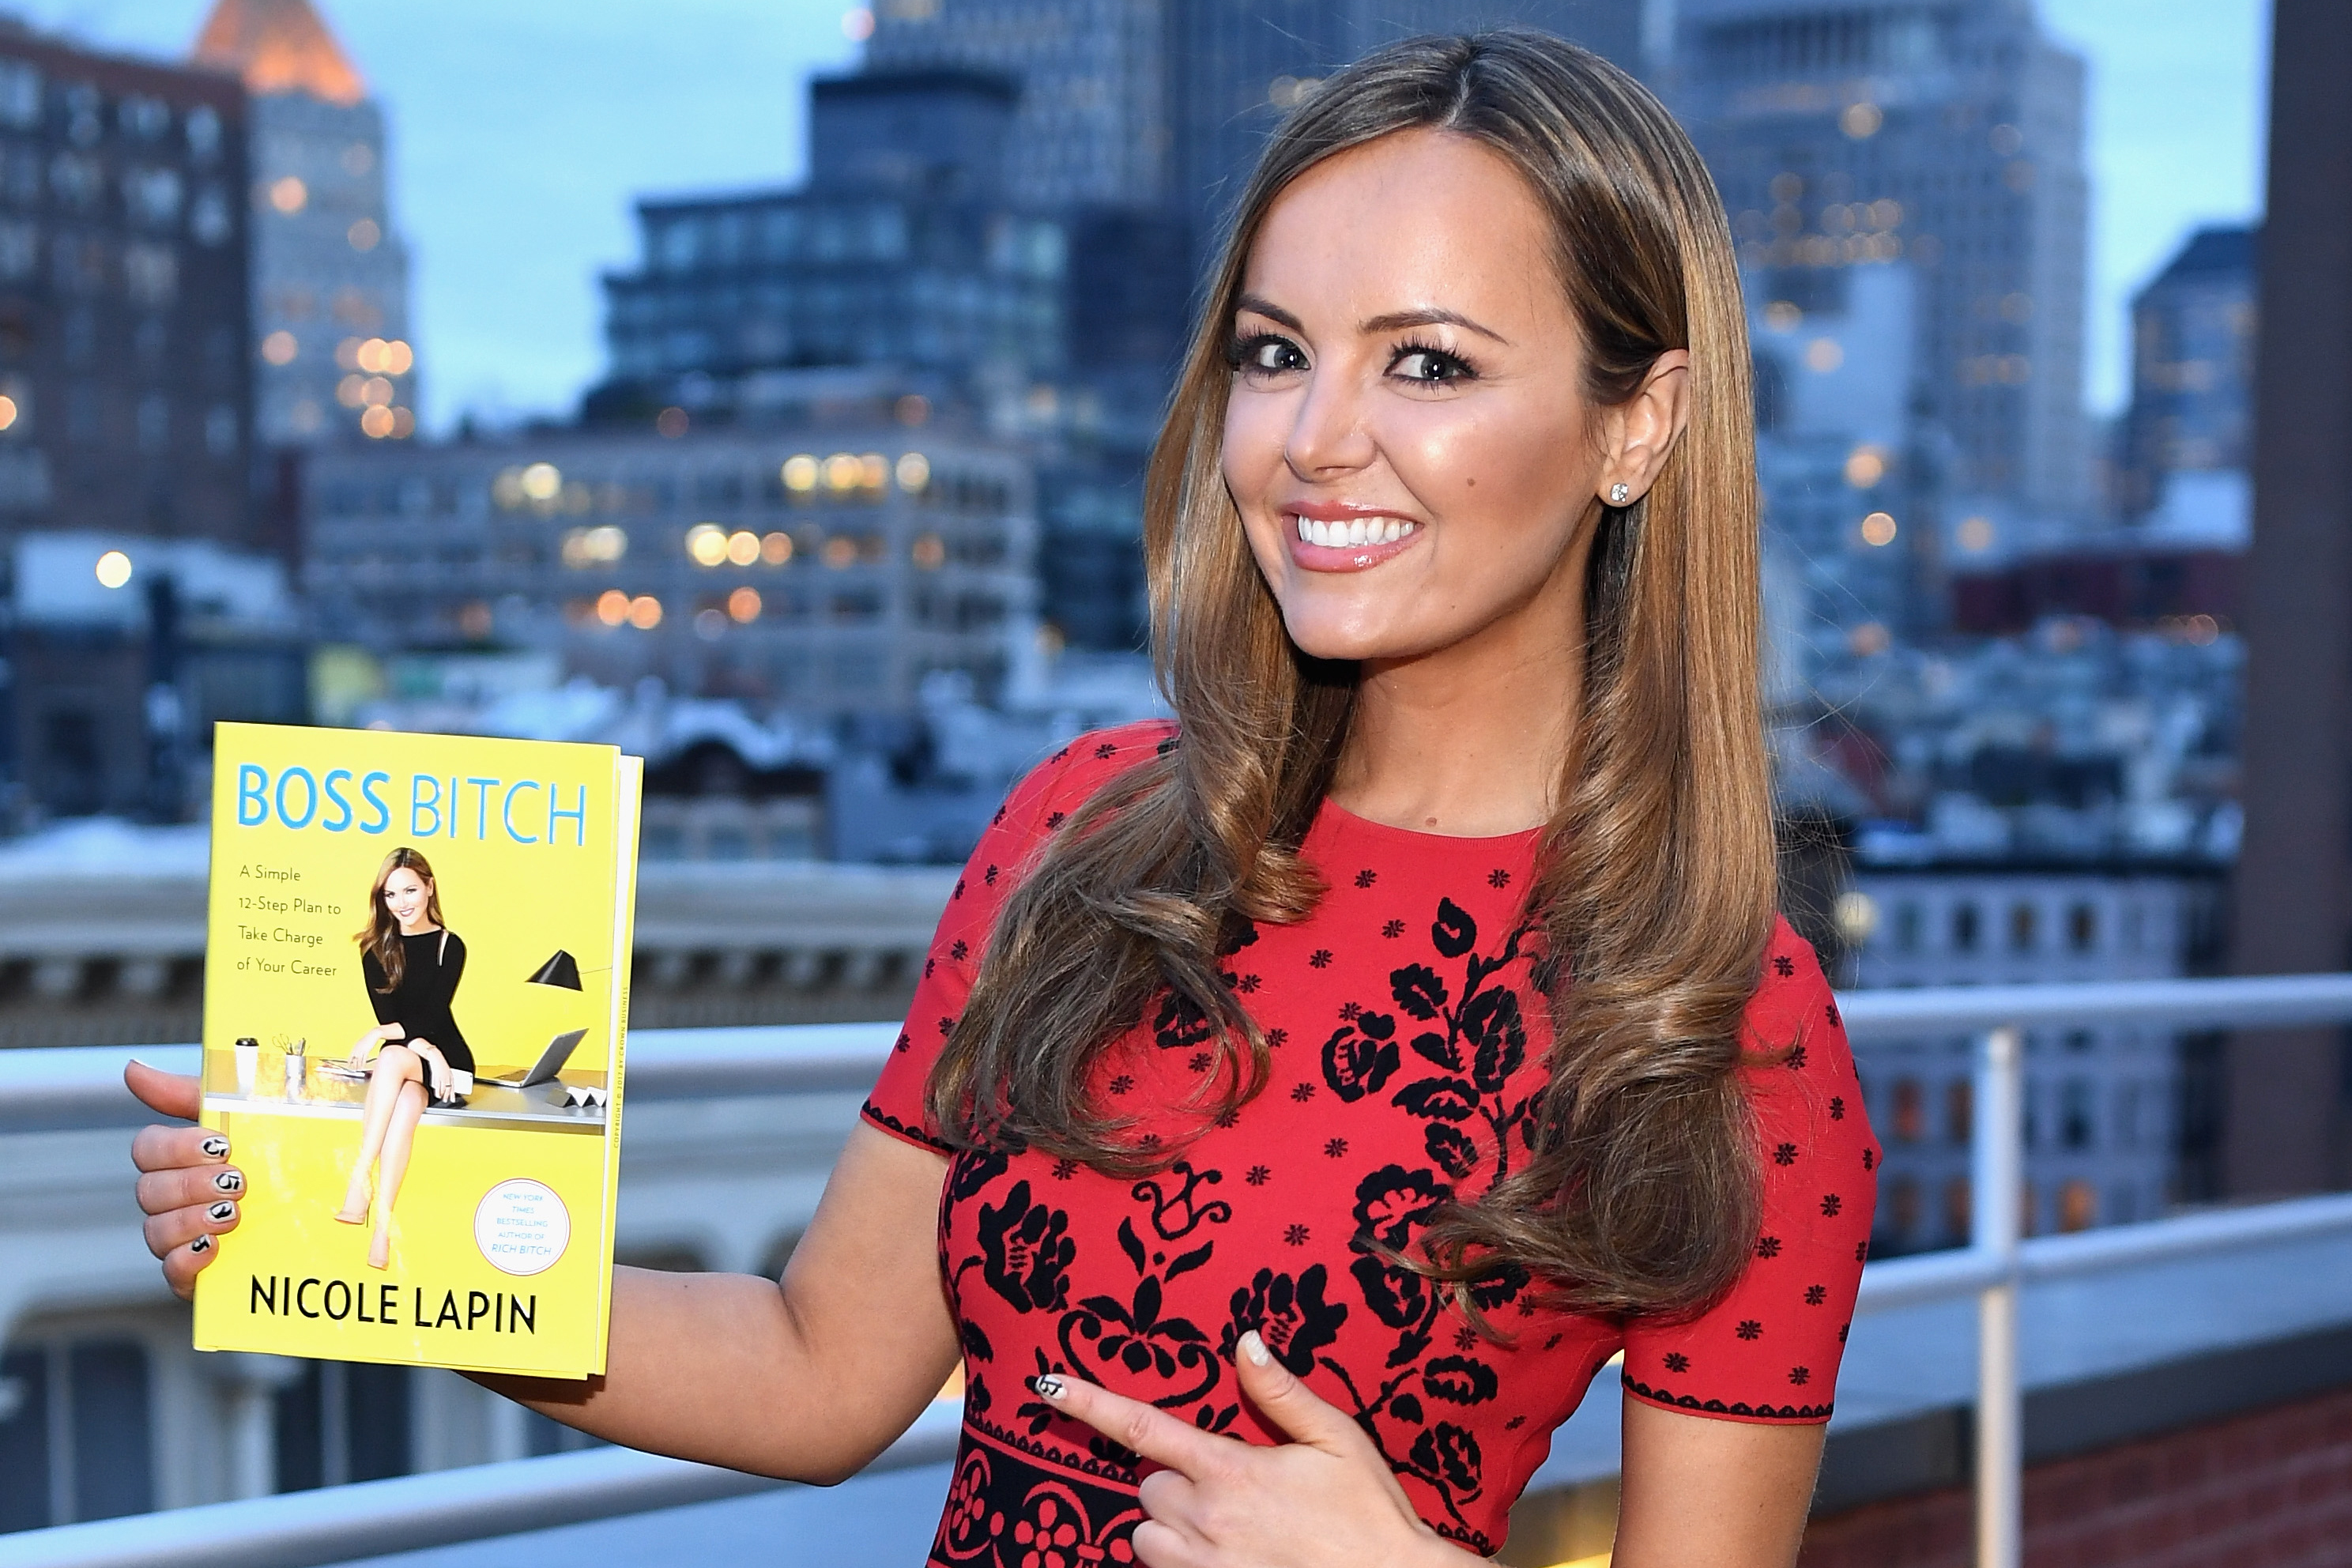 Private Party To Celebrate The Release of Nicole Lapin's Second Book &quot;BOSS BITCH&quot;